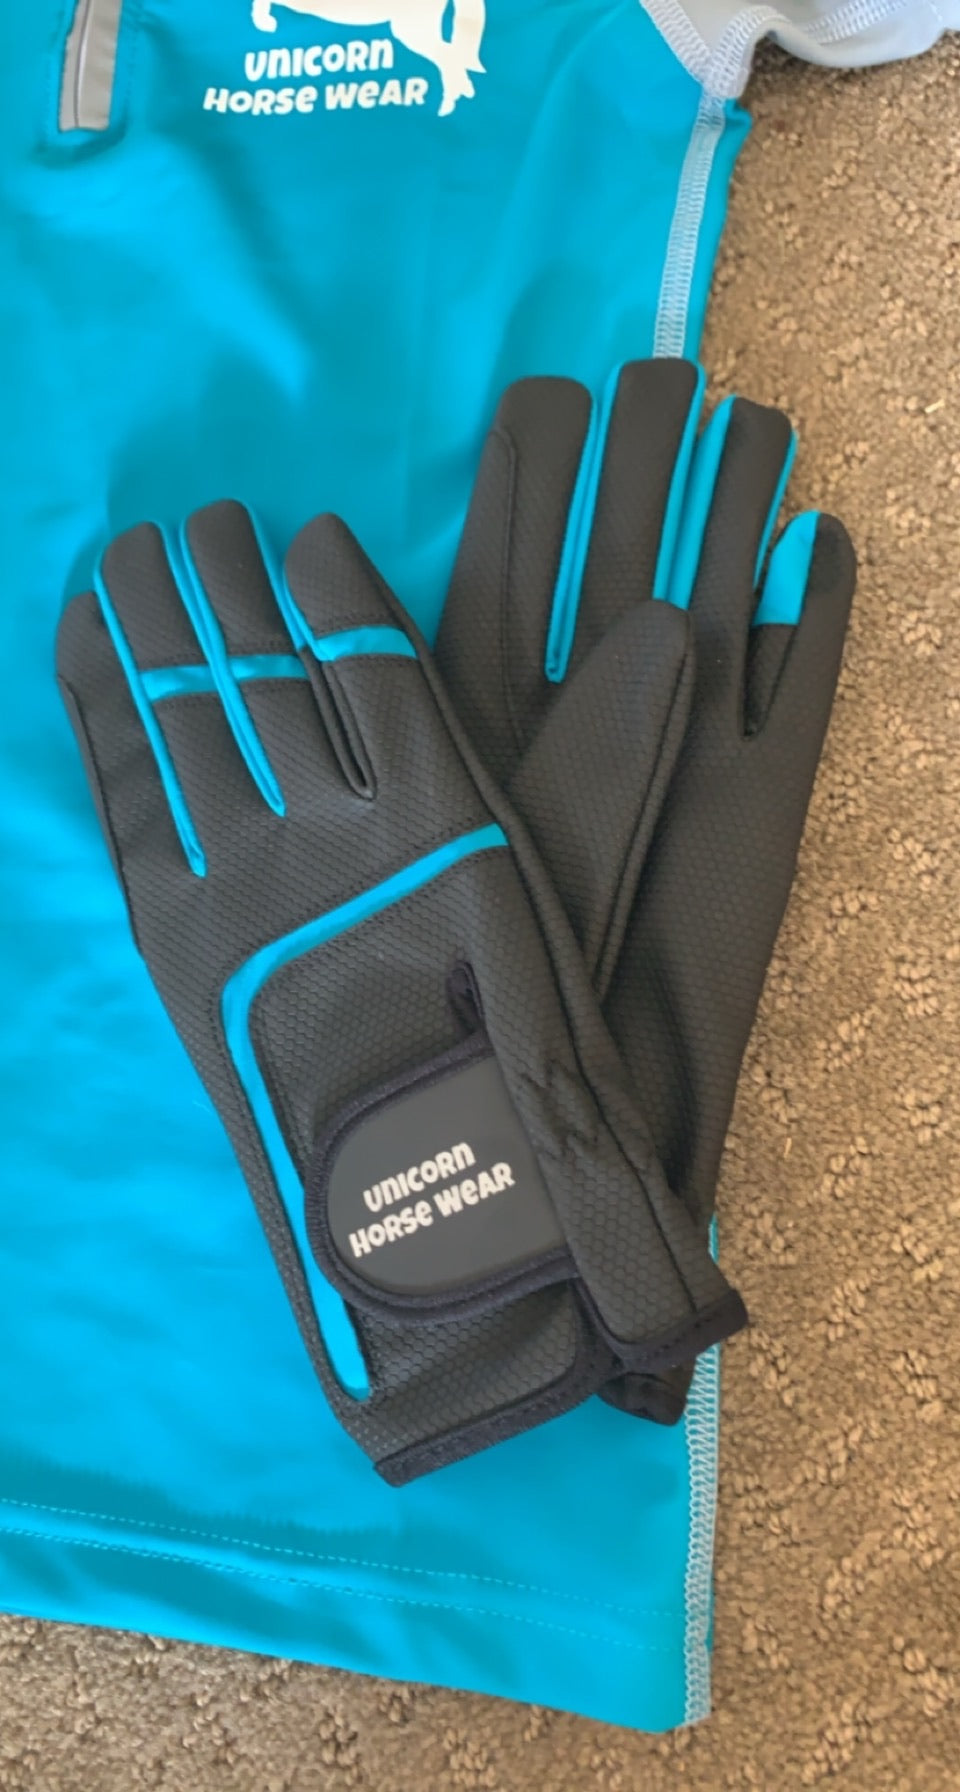 Child’s Teal Riding Gloves